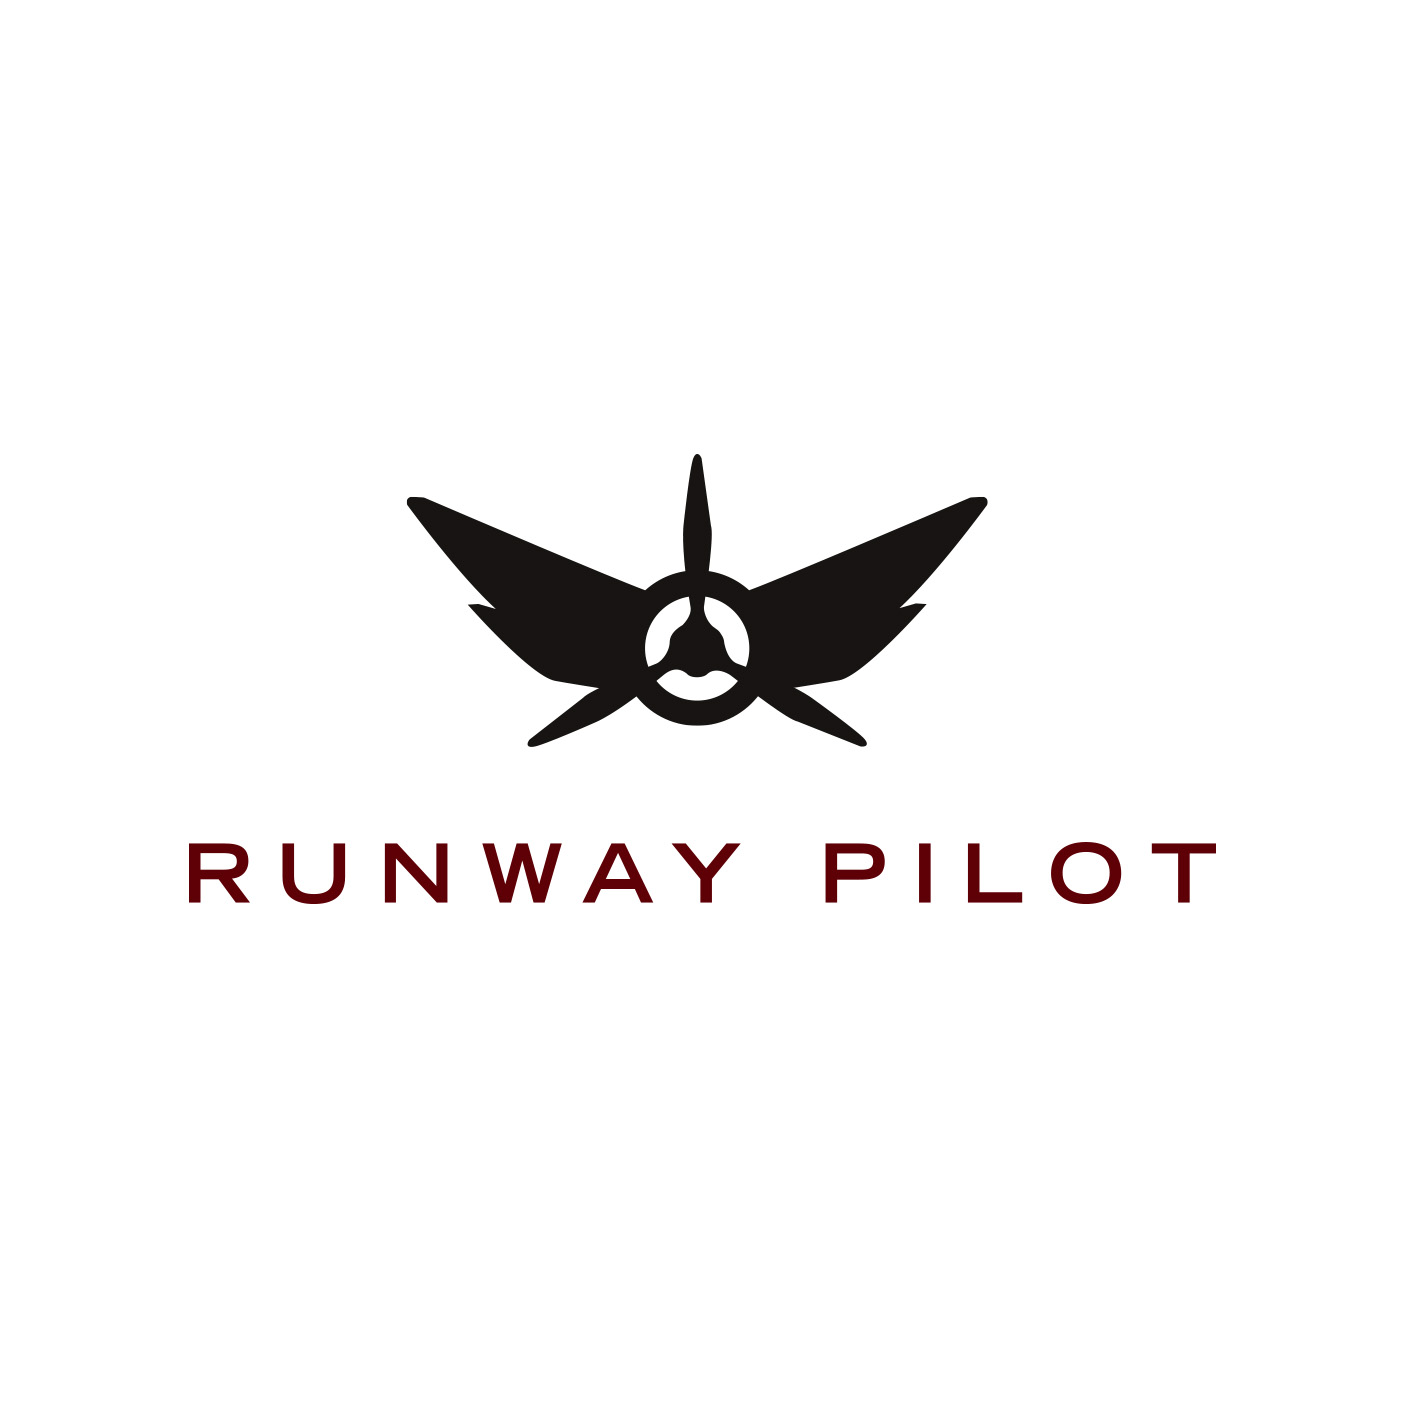 Wings and propeller logo for the aviator clothing brand, Runway Pilot.